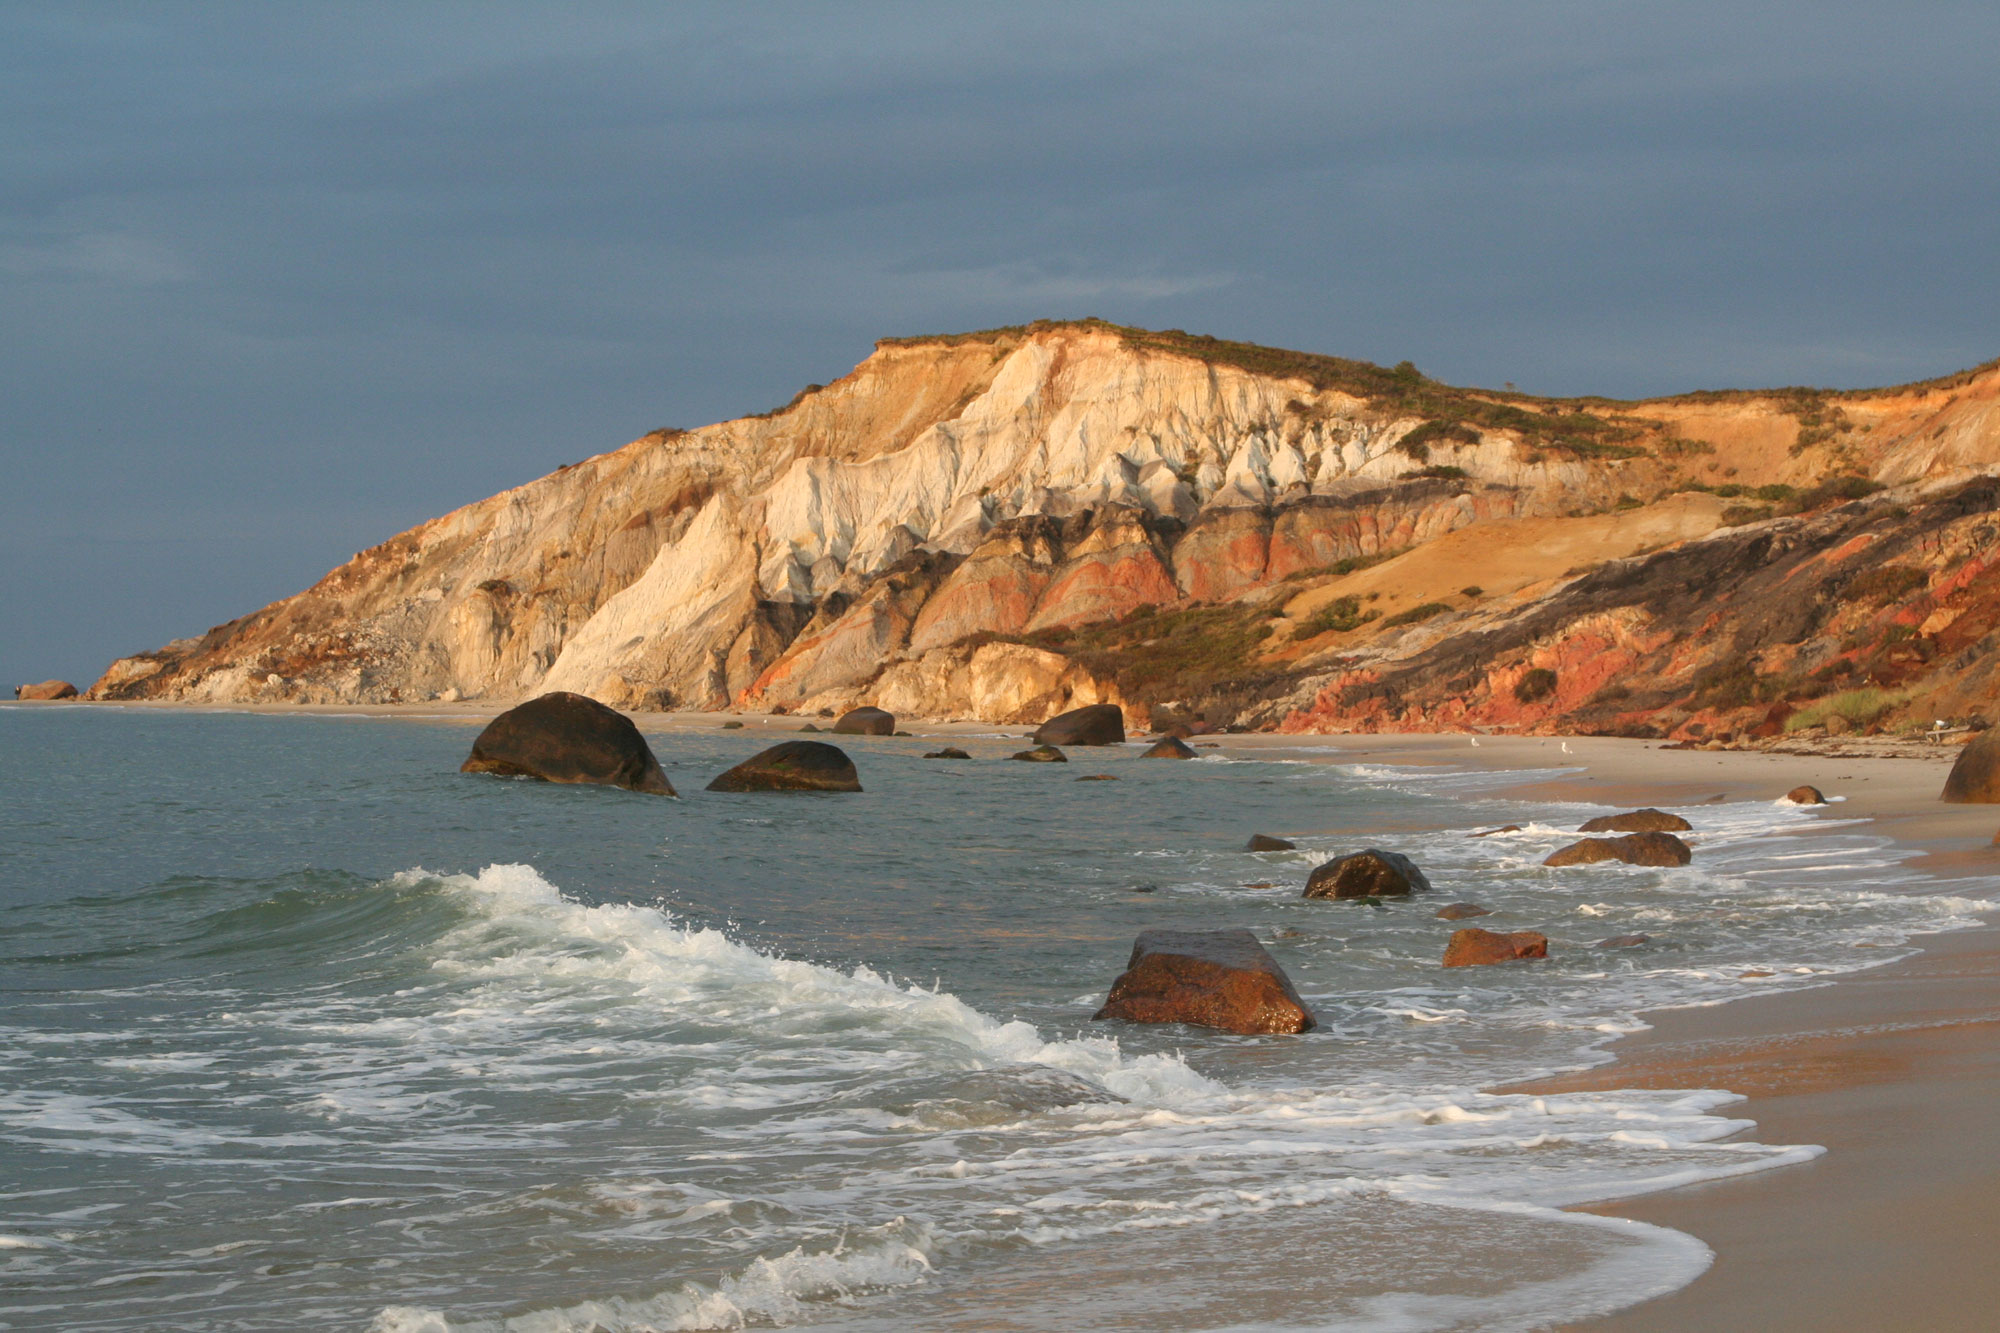 Photograph of Gay Head Cliff on Martha's Vineyard in Massachusetts. The photo shows a cliff face above a narrow beach bordering the water. The cliff is banded with red, black, and tan rocks. 